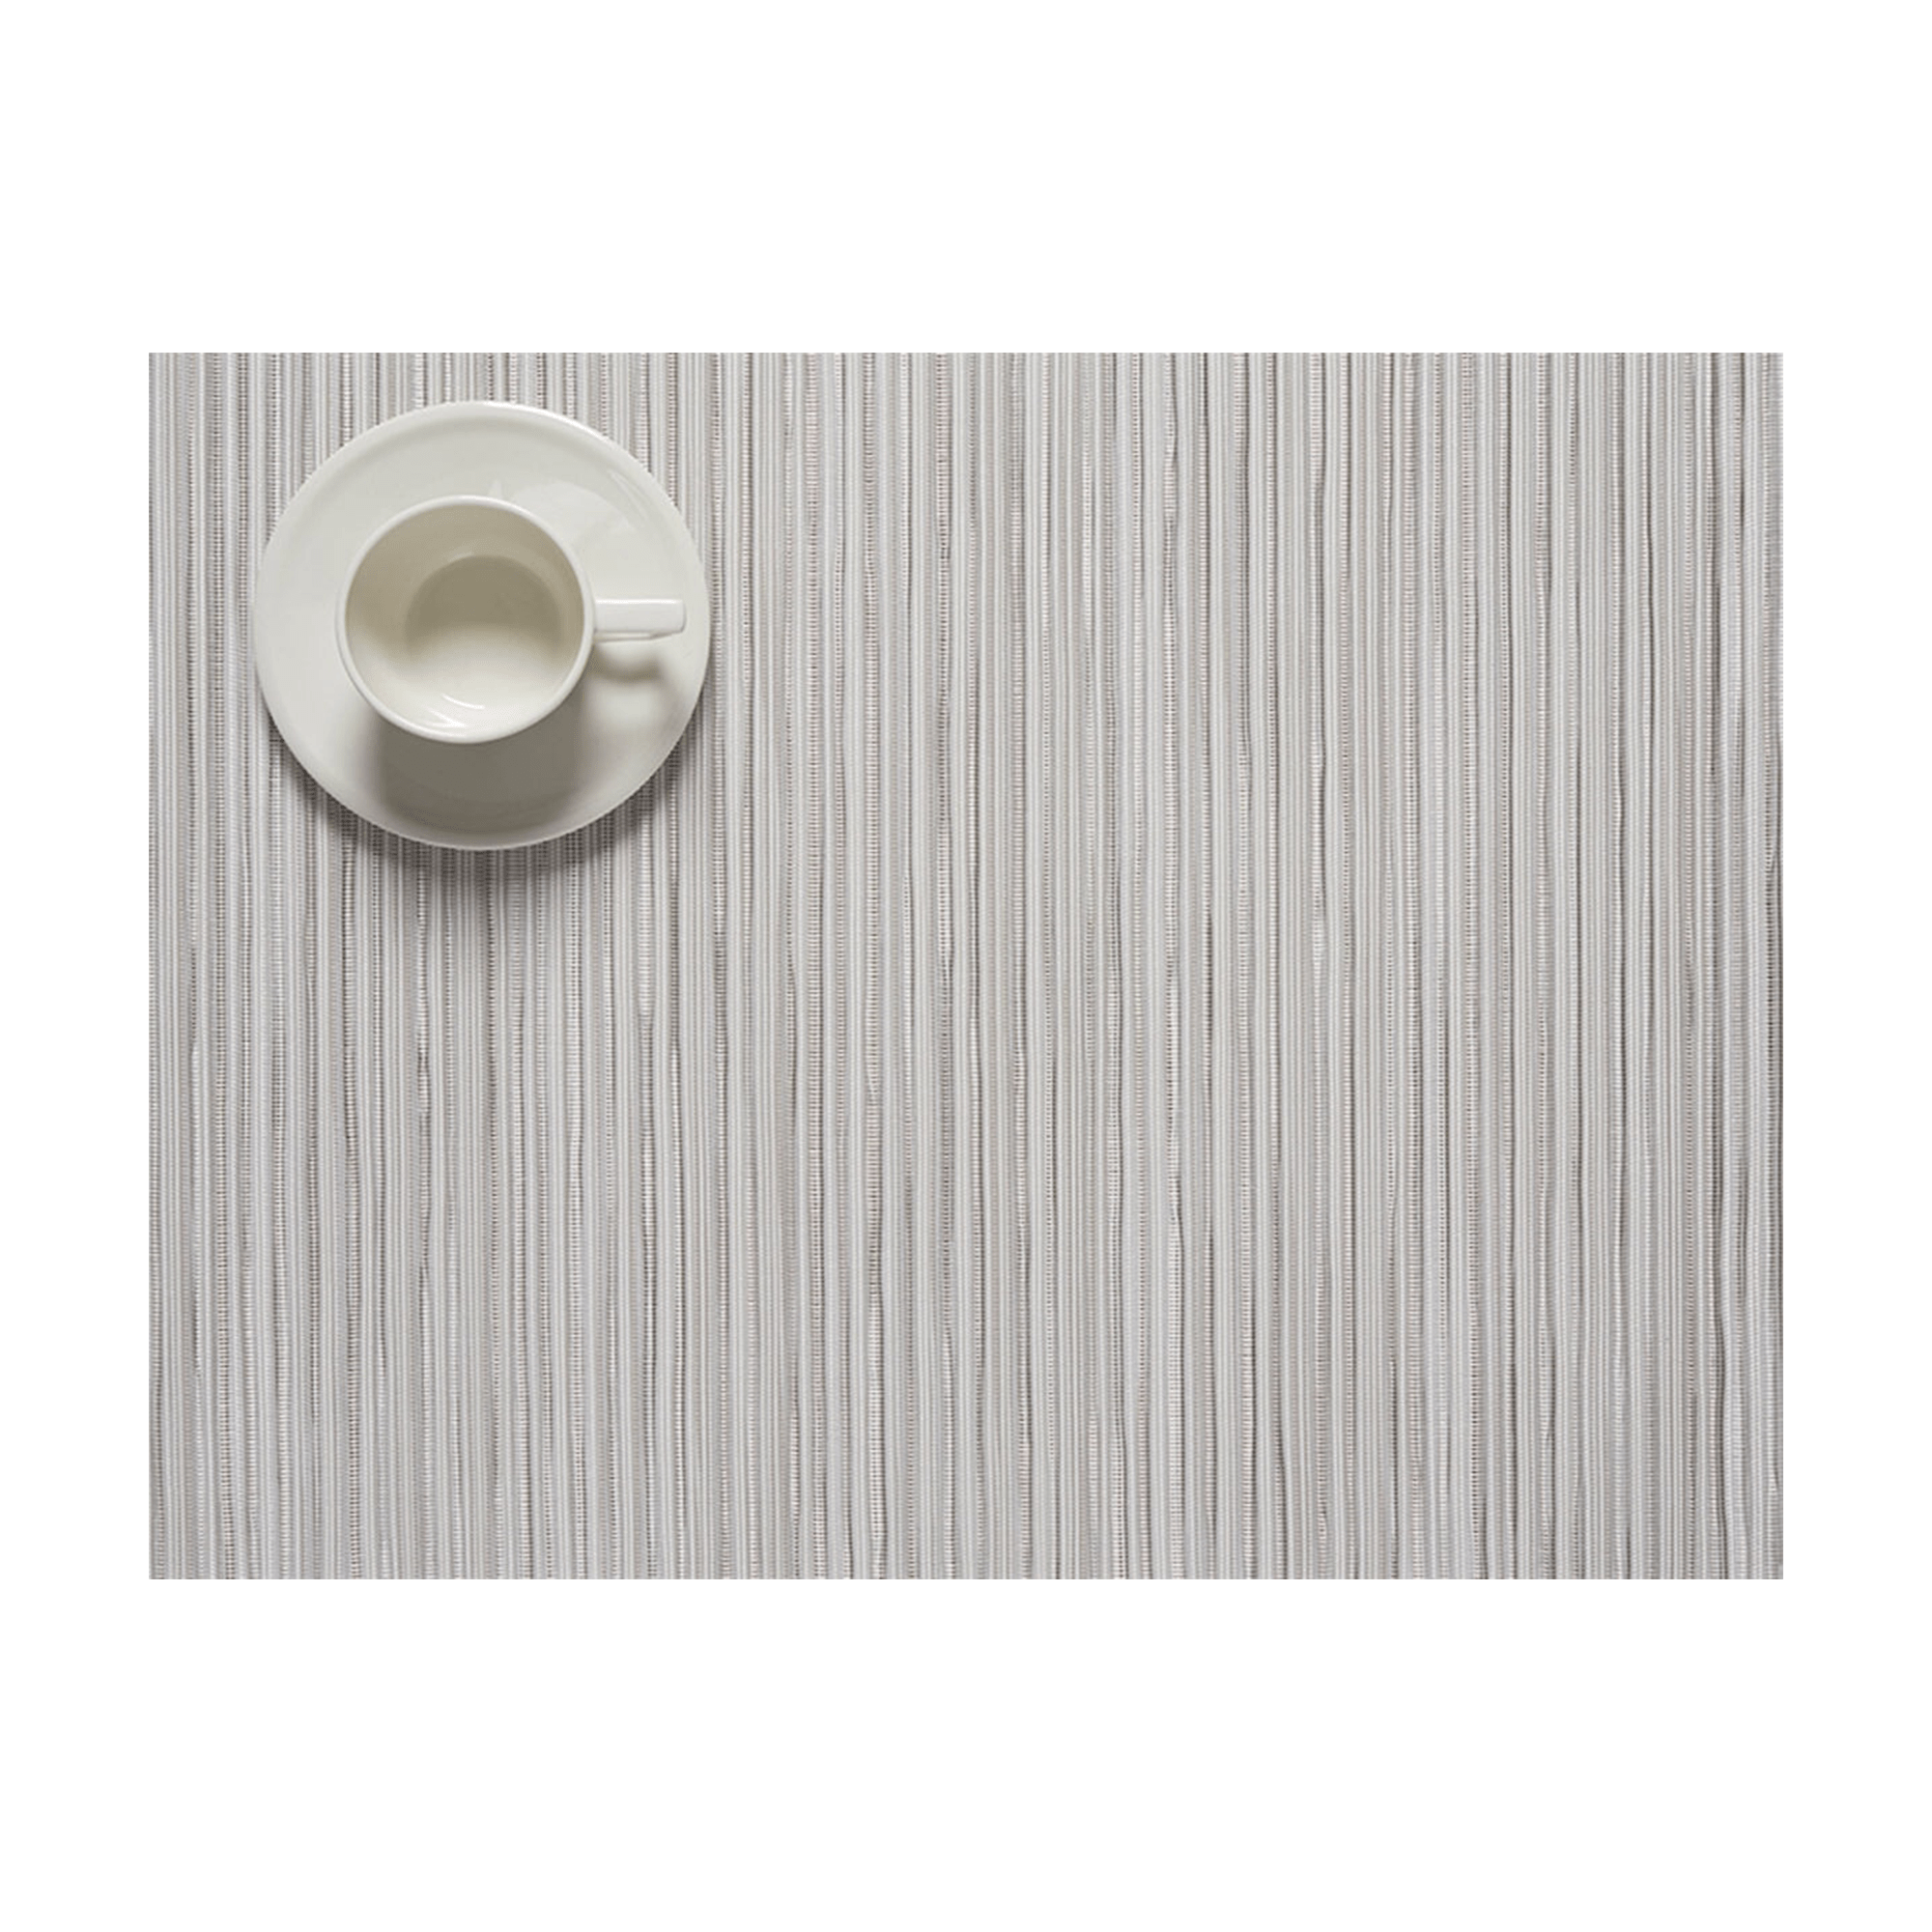 Rib Weave Placemat Placemats Chilewich Birch 